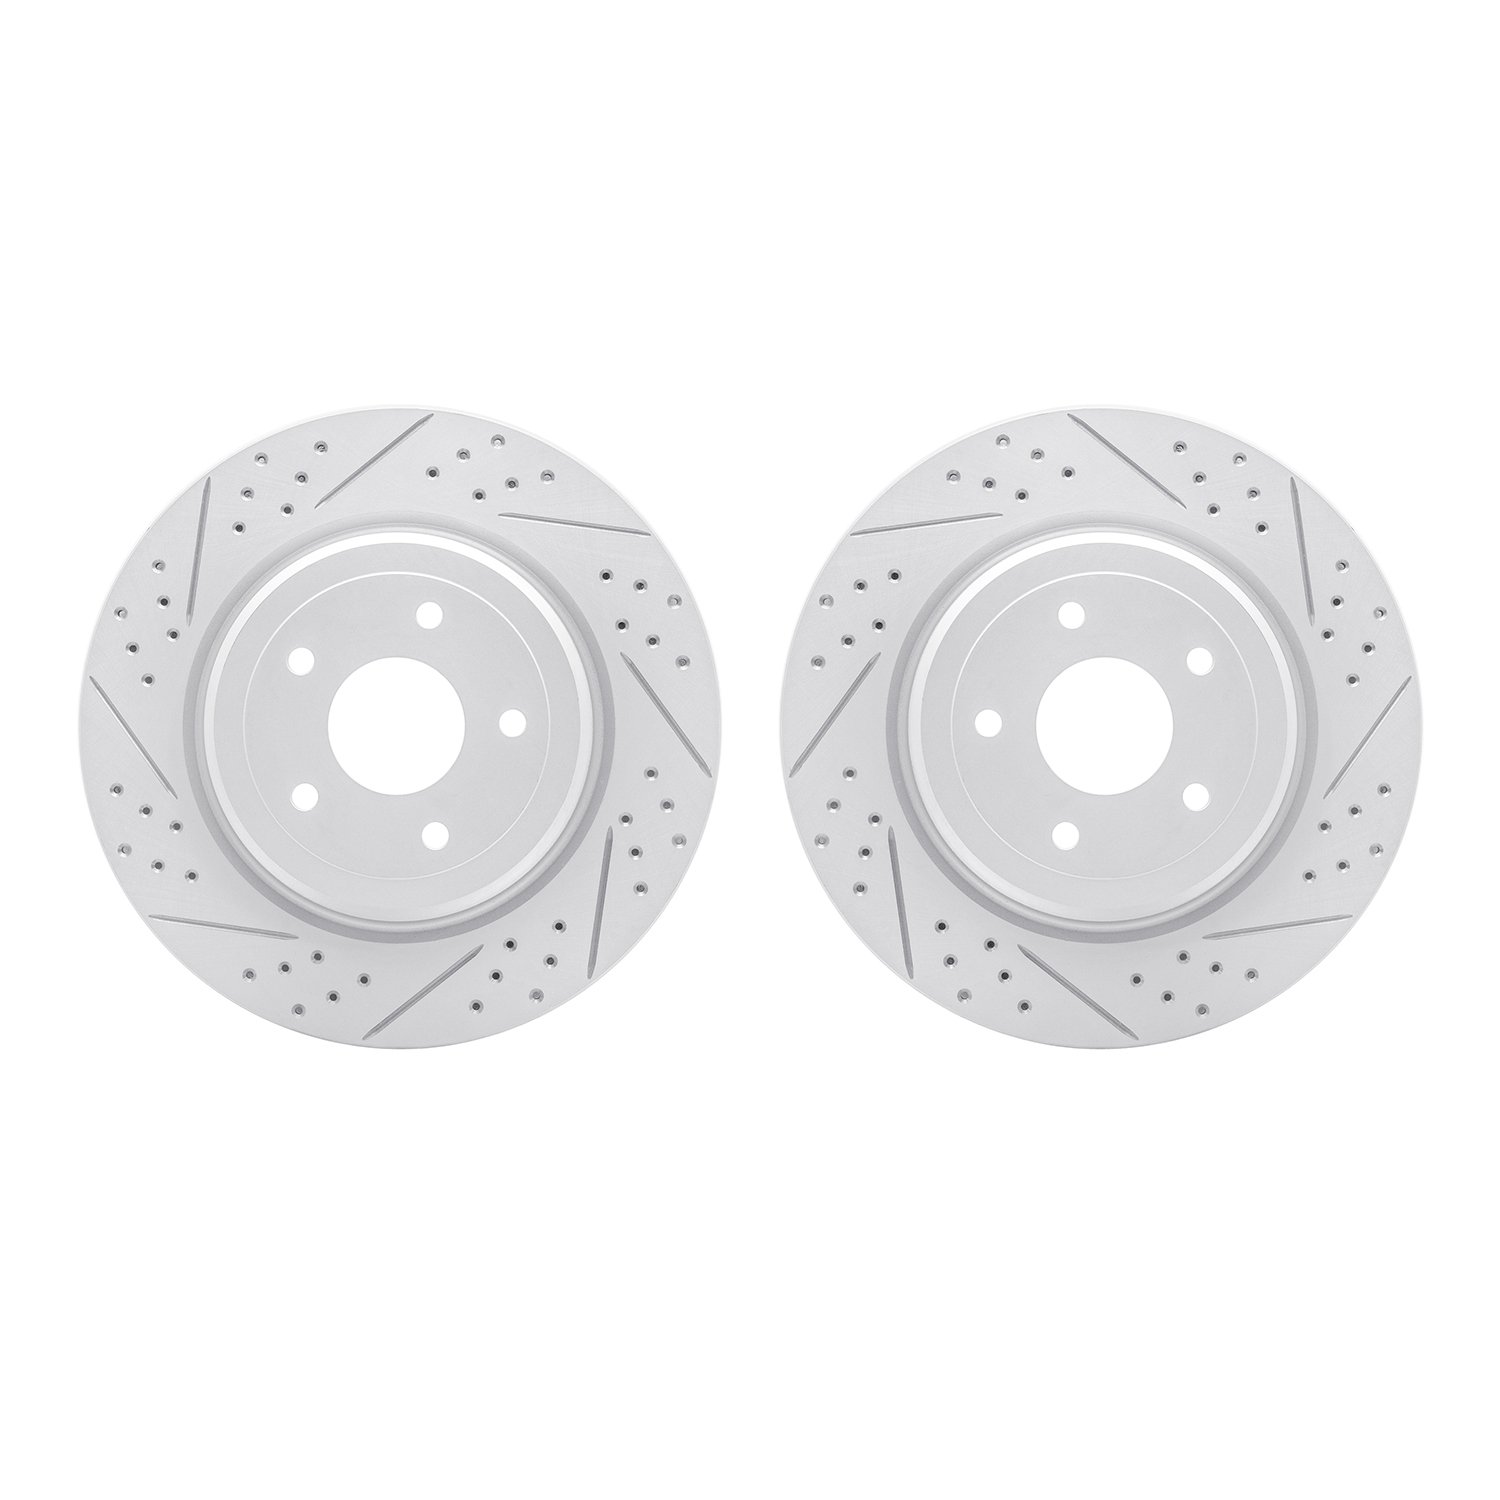 2002-47041 Geoperformance Drilled/Slotted Brake Rotors, 2006-2013 GM, Position: Rear